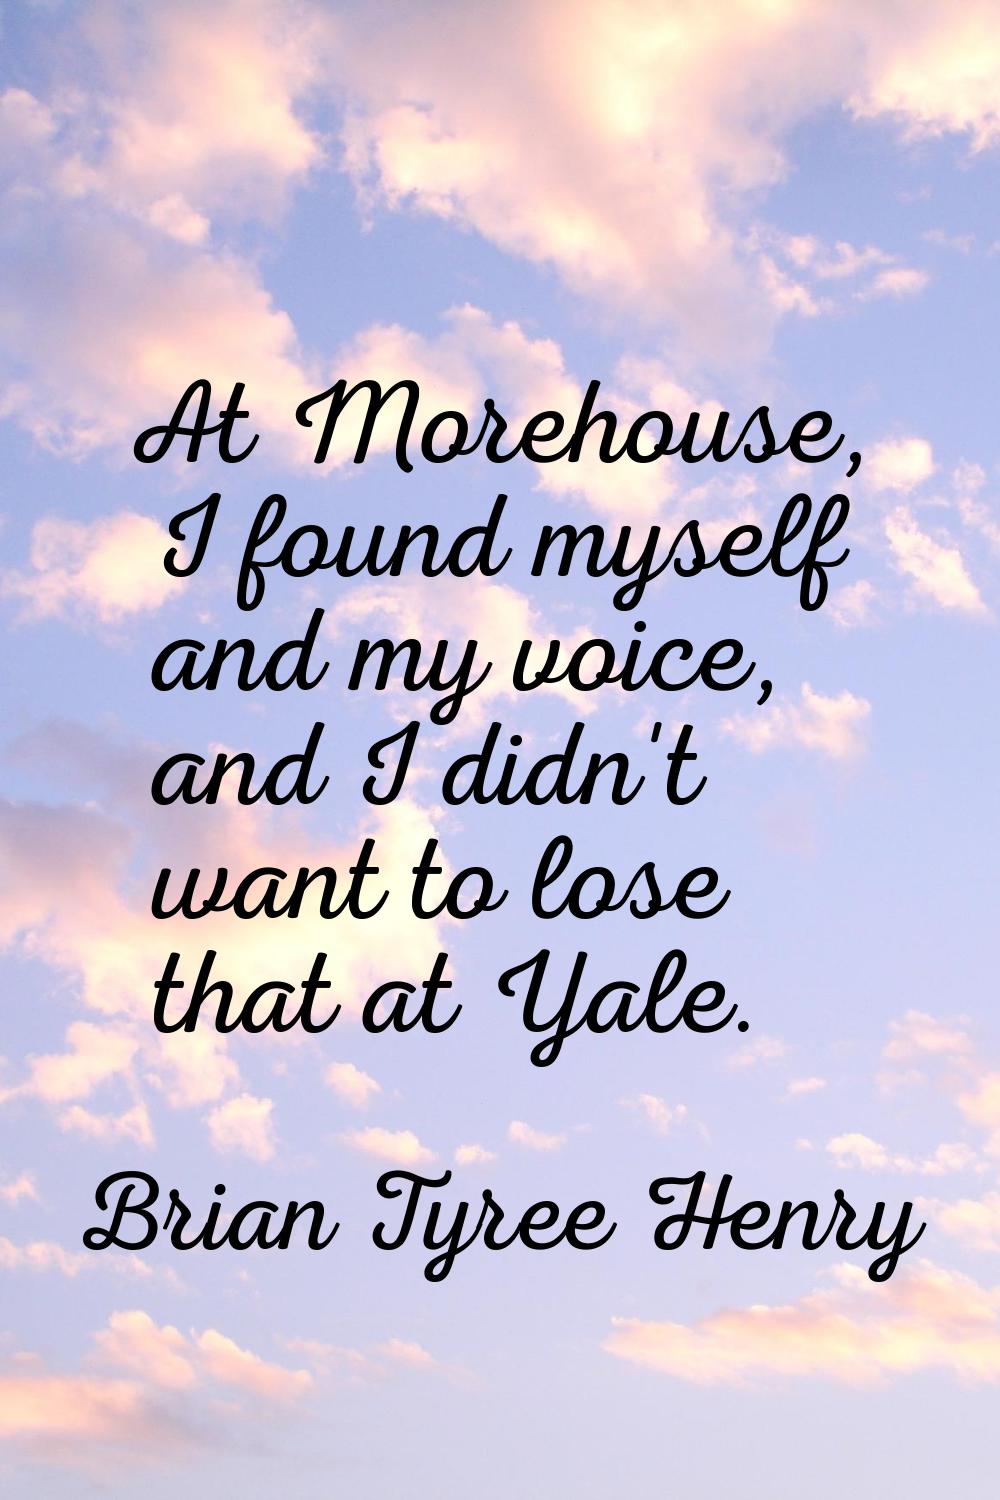 At Morehouse, I found myself and my voice, and I didn't want to lose that at Yale.